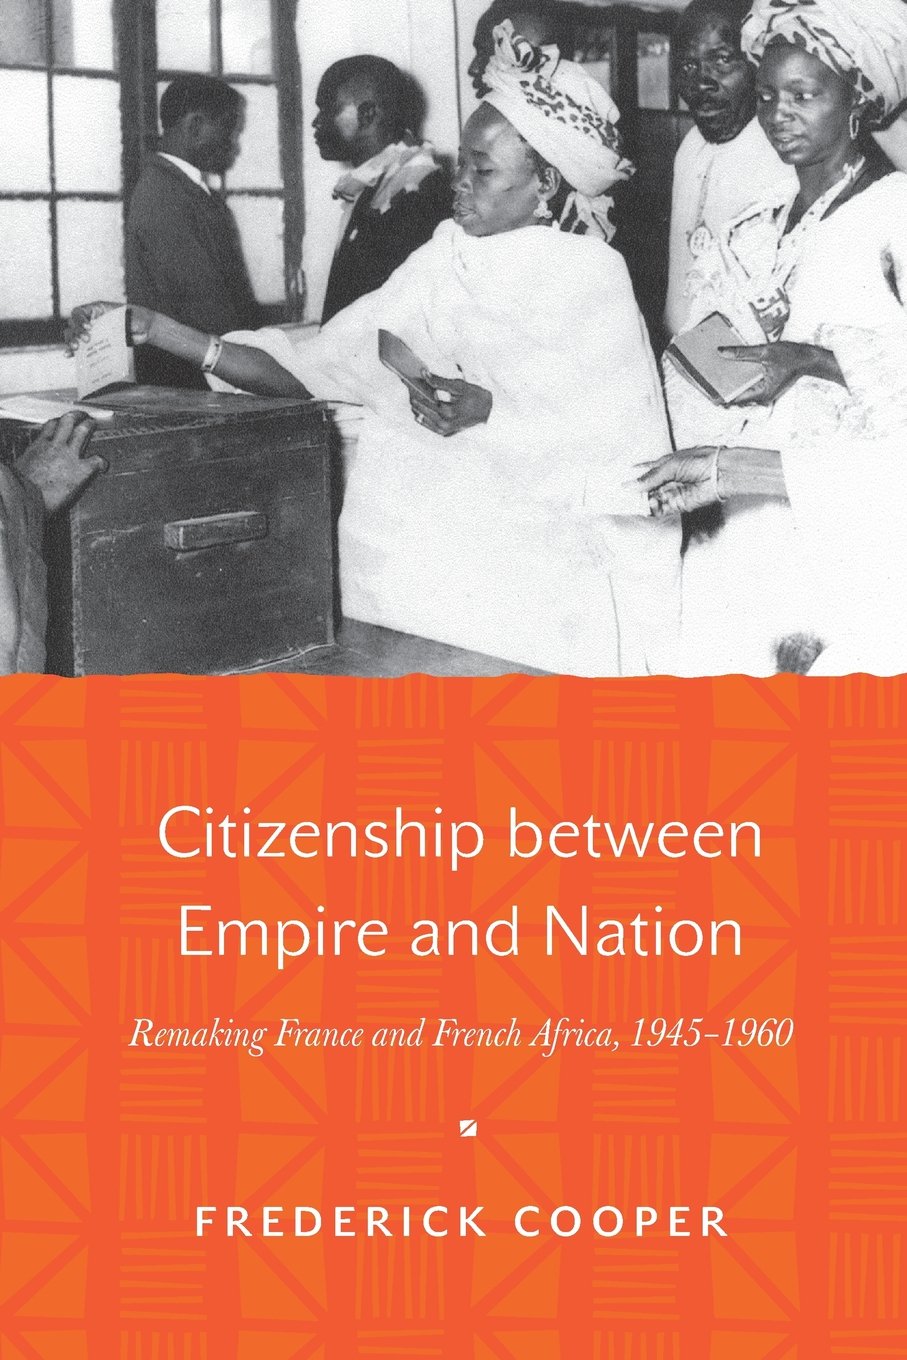 Citizenship Between Empire and Nation: Remaking France and French Africa, 1945-1960